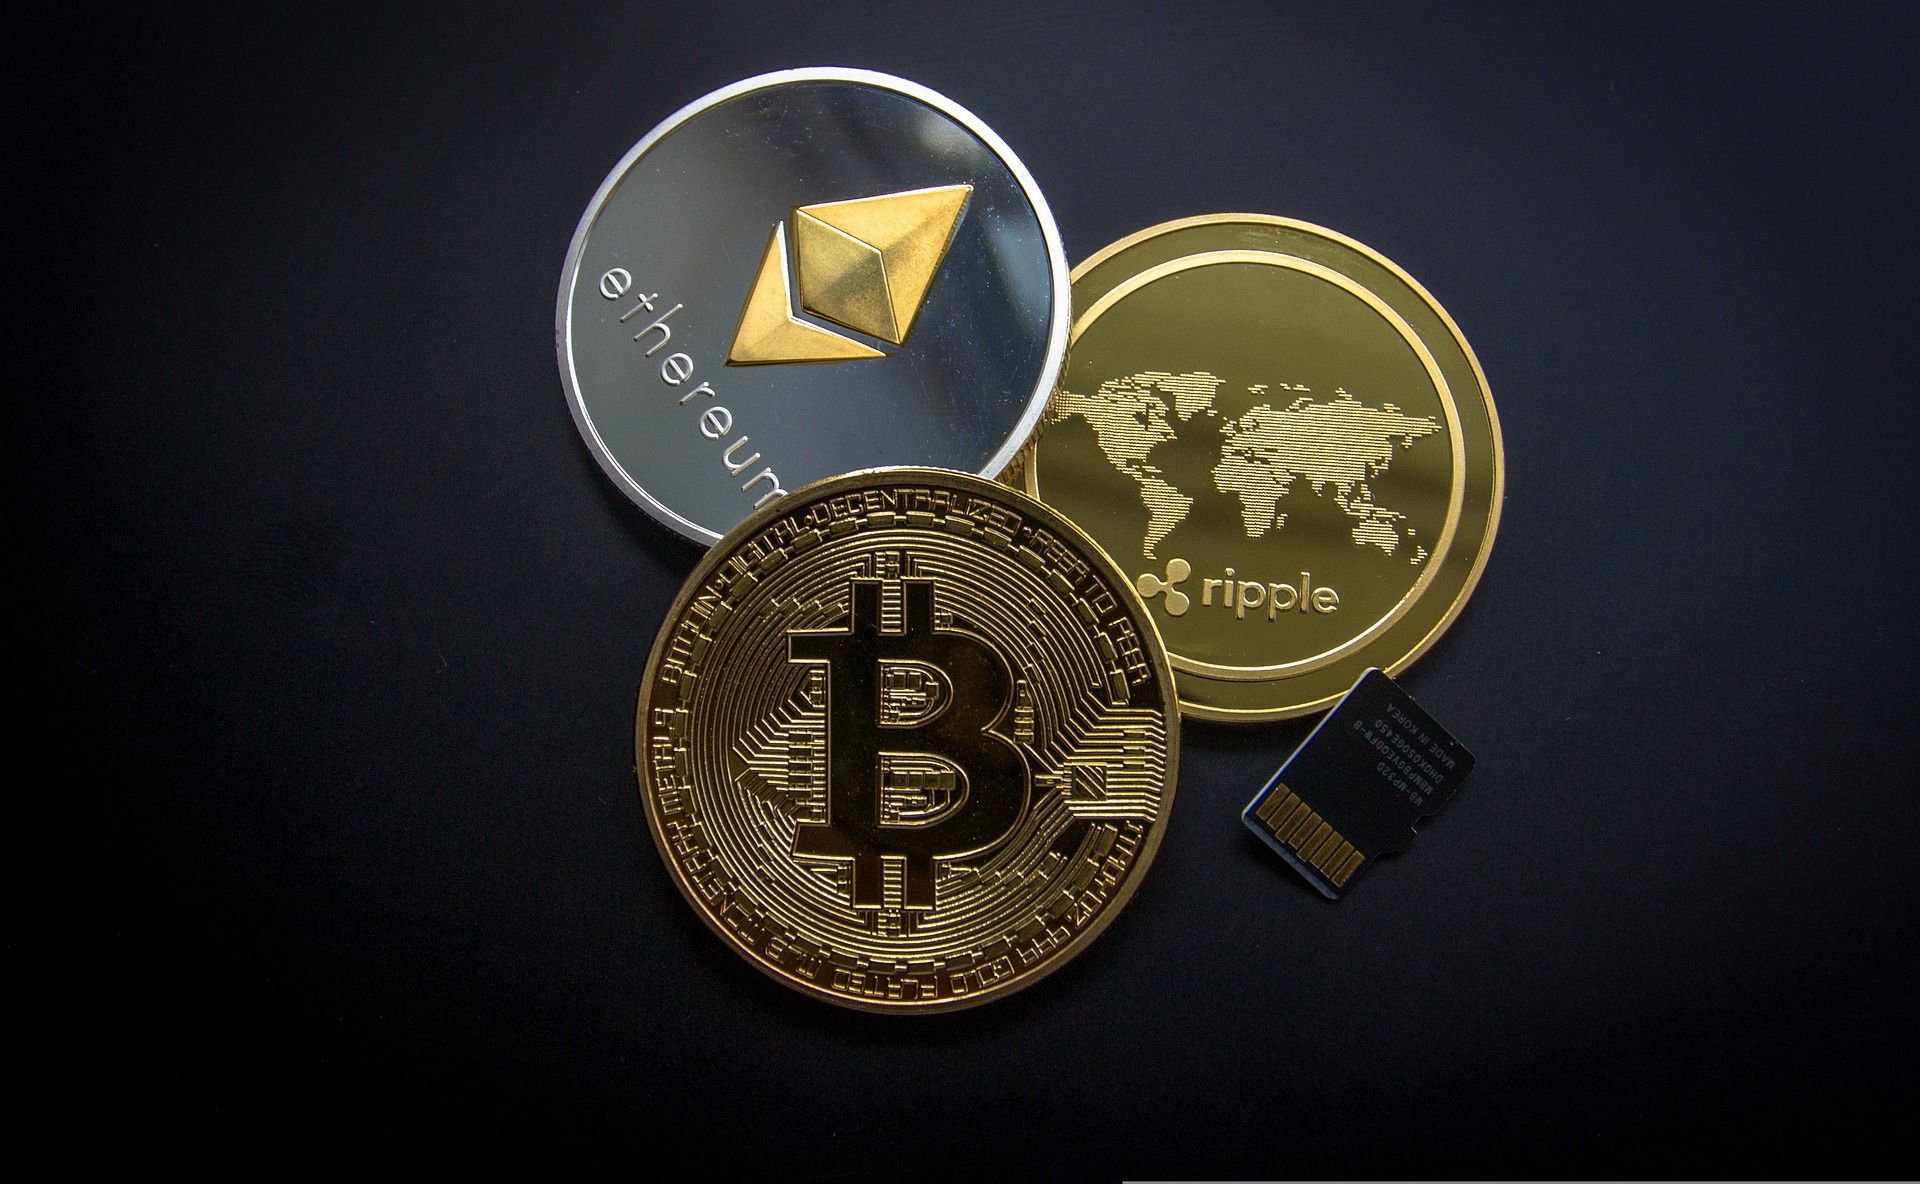 Top 5 cryptocurrencies of the day: Bitcoin up 4%, FTX Token trends at no. 1